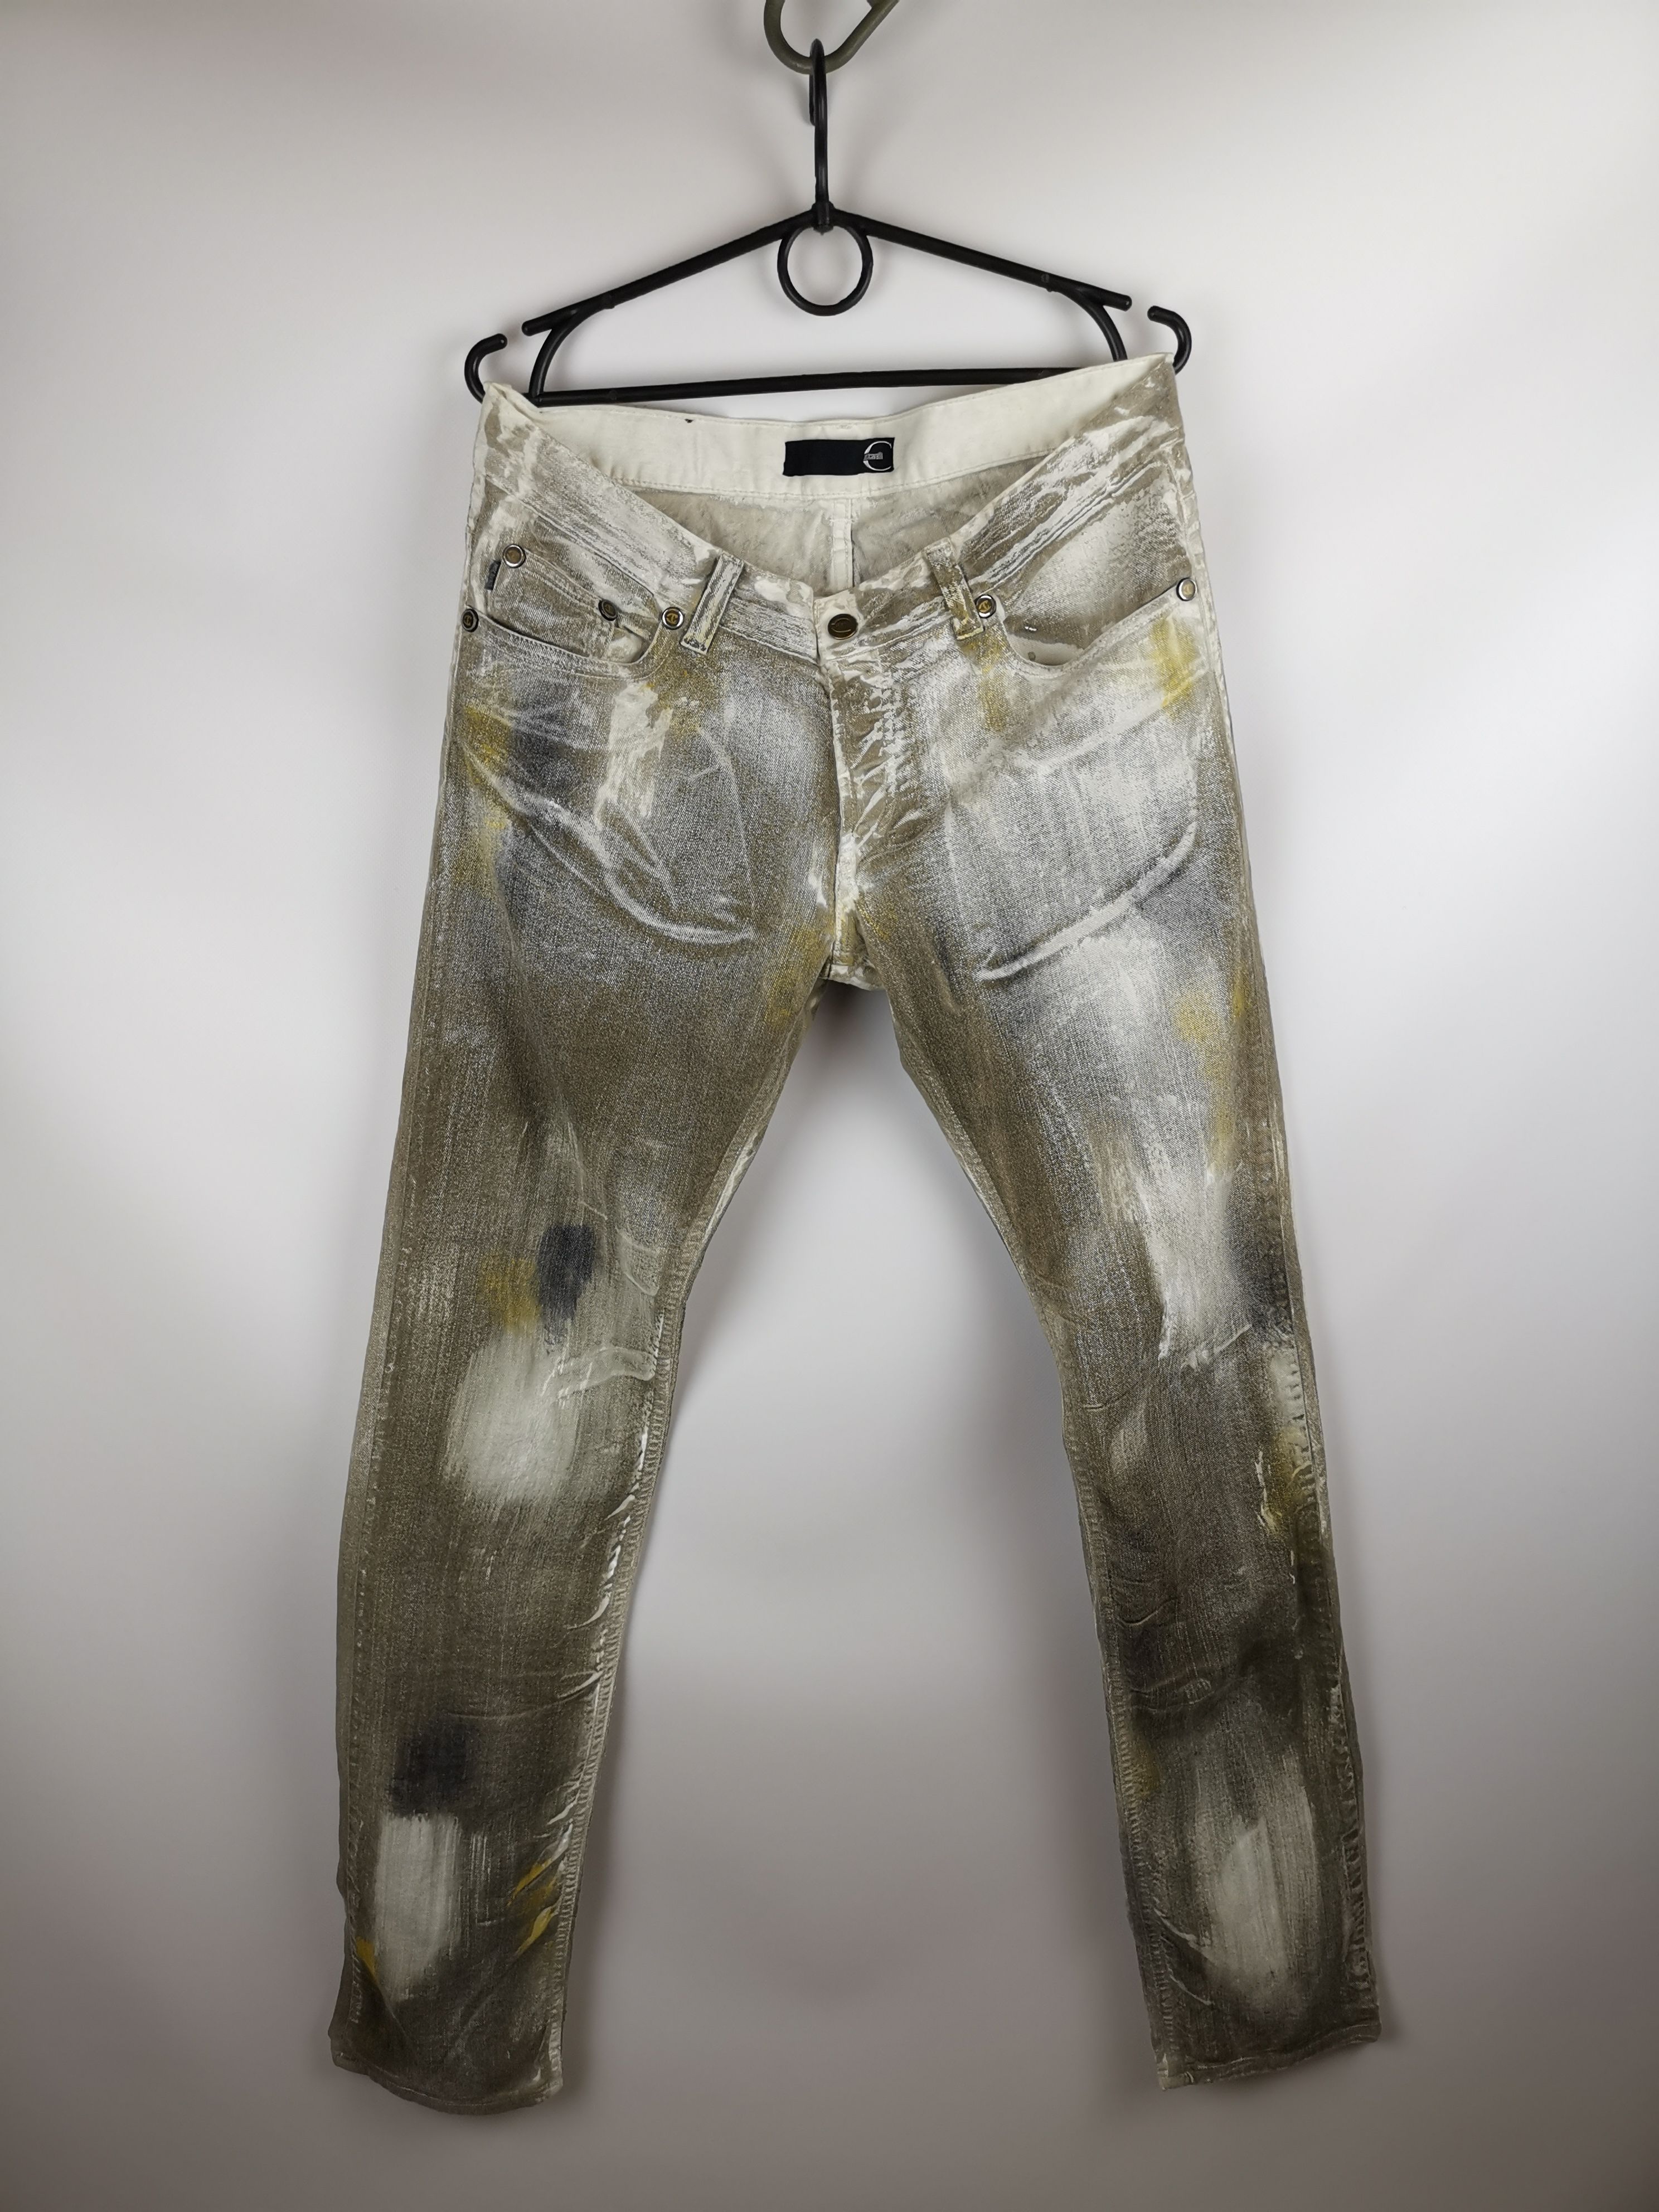 Pre-owned Just Cavalli Multicolor Hand Painted Distressed Denim Jeans